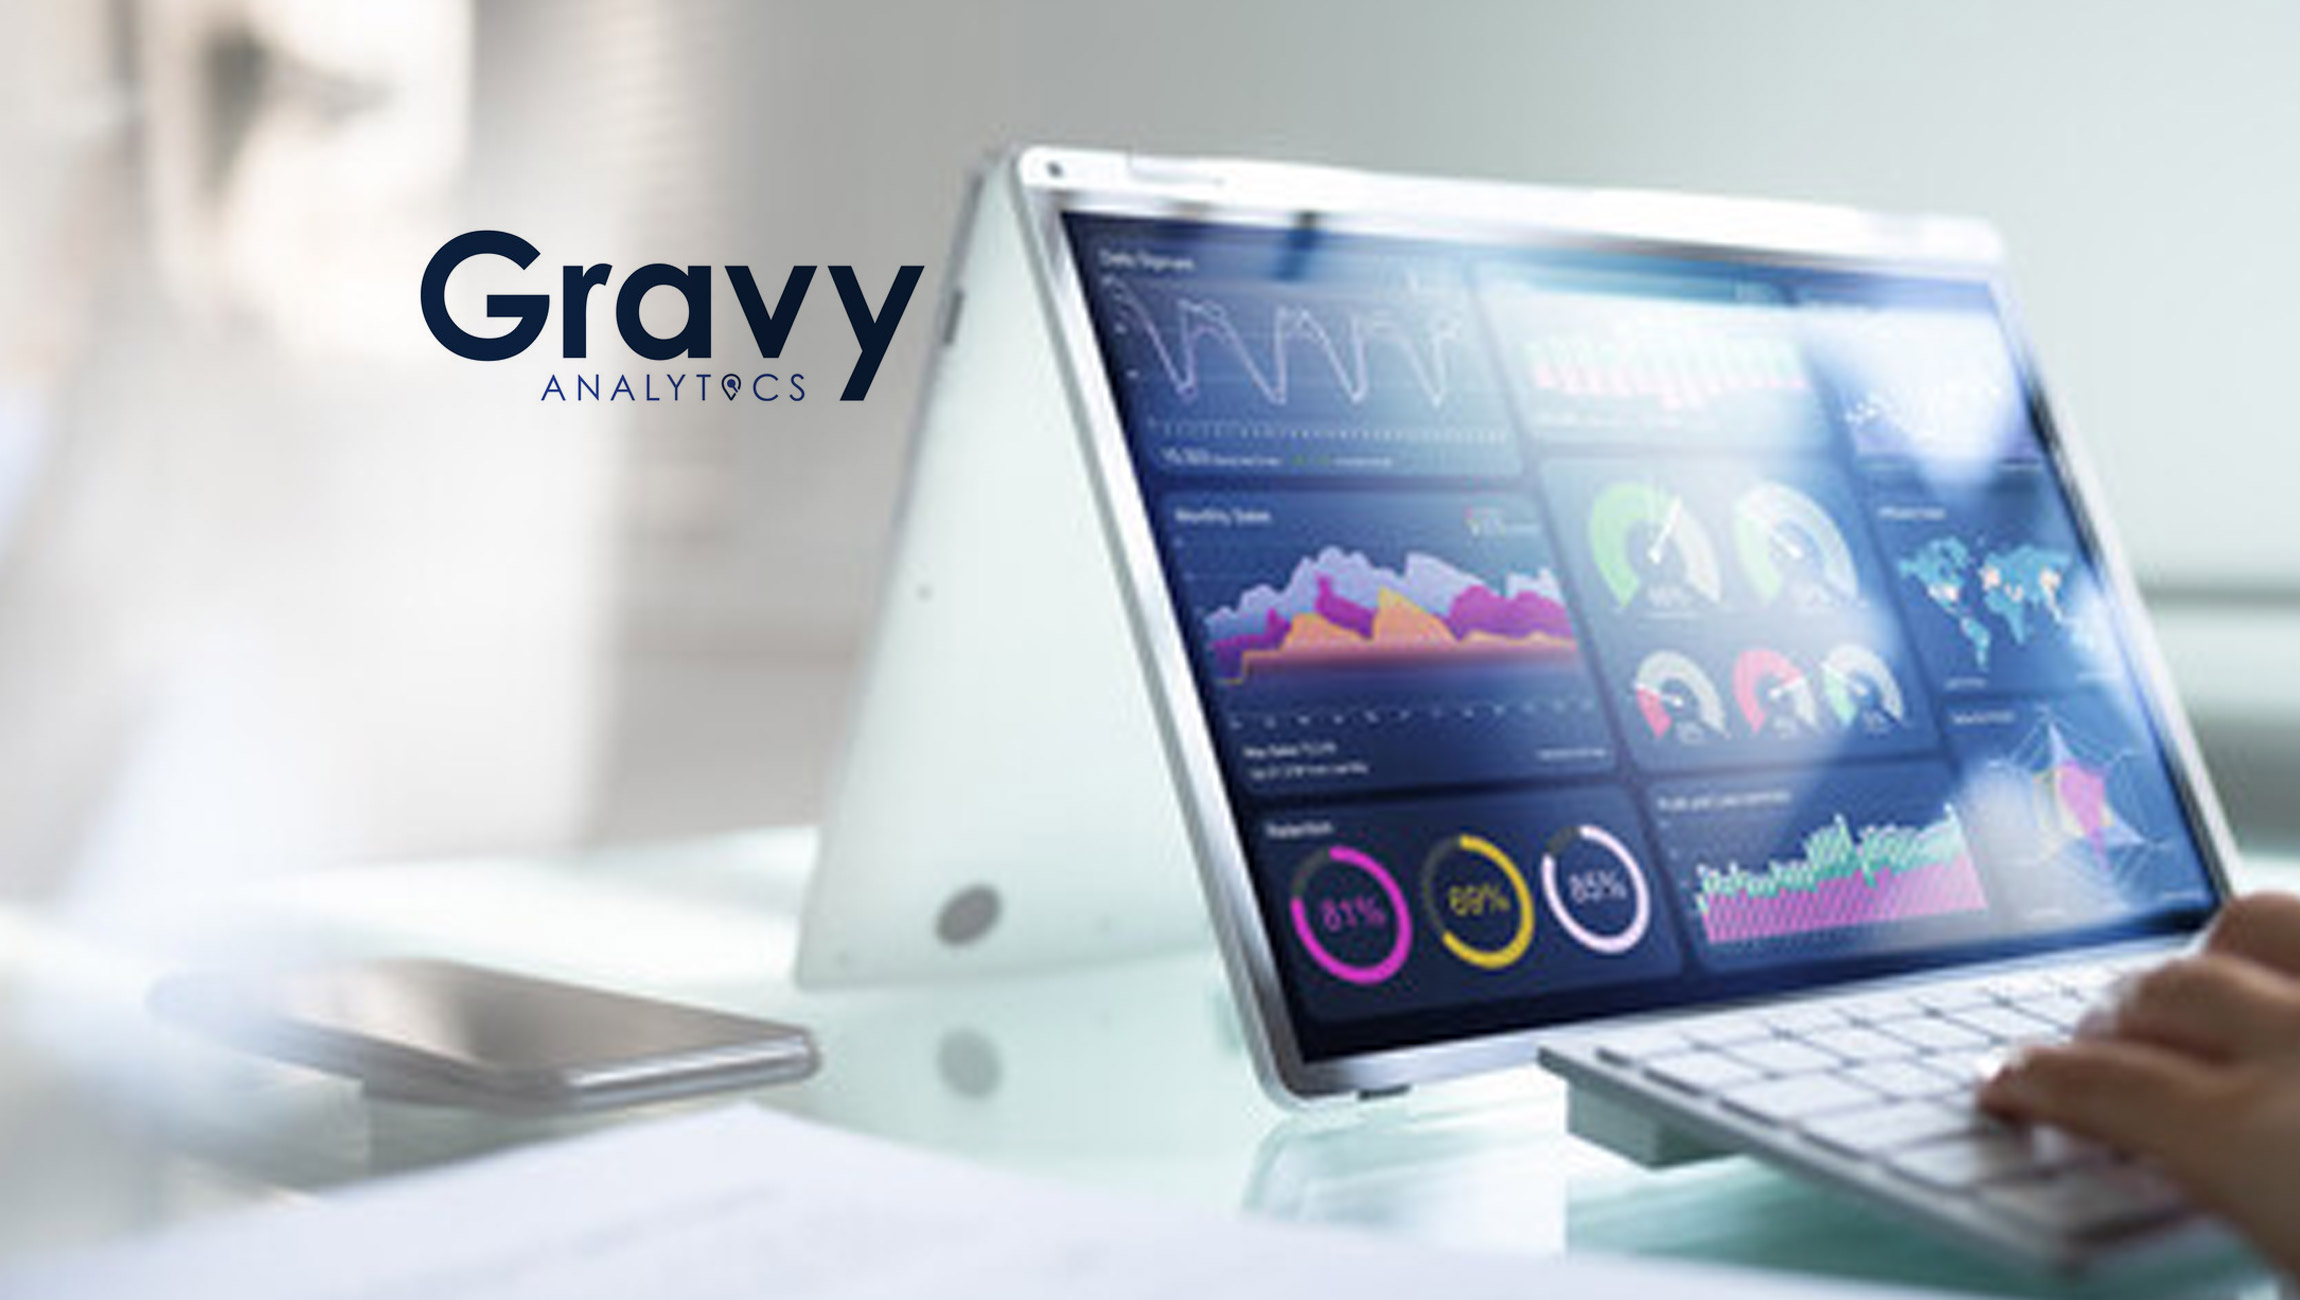 New Insights From Gravy Analytics Reveal Consumers Are Prioritizing Entertainment and Value Shopping Over Vacations and Outdoor Recreation